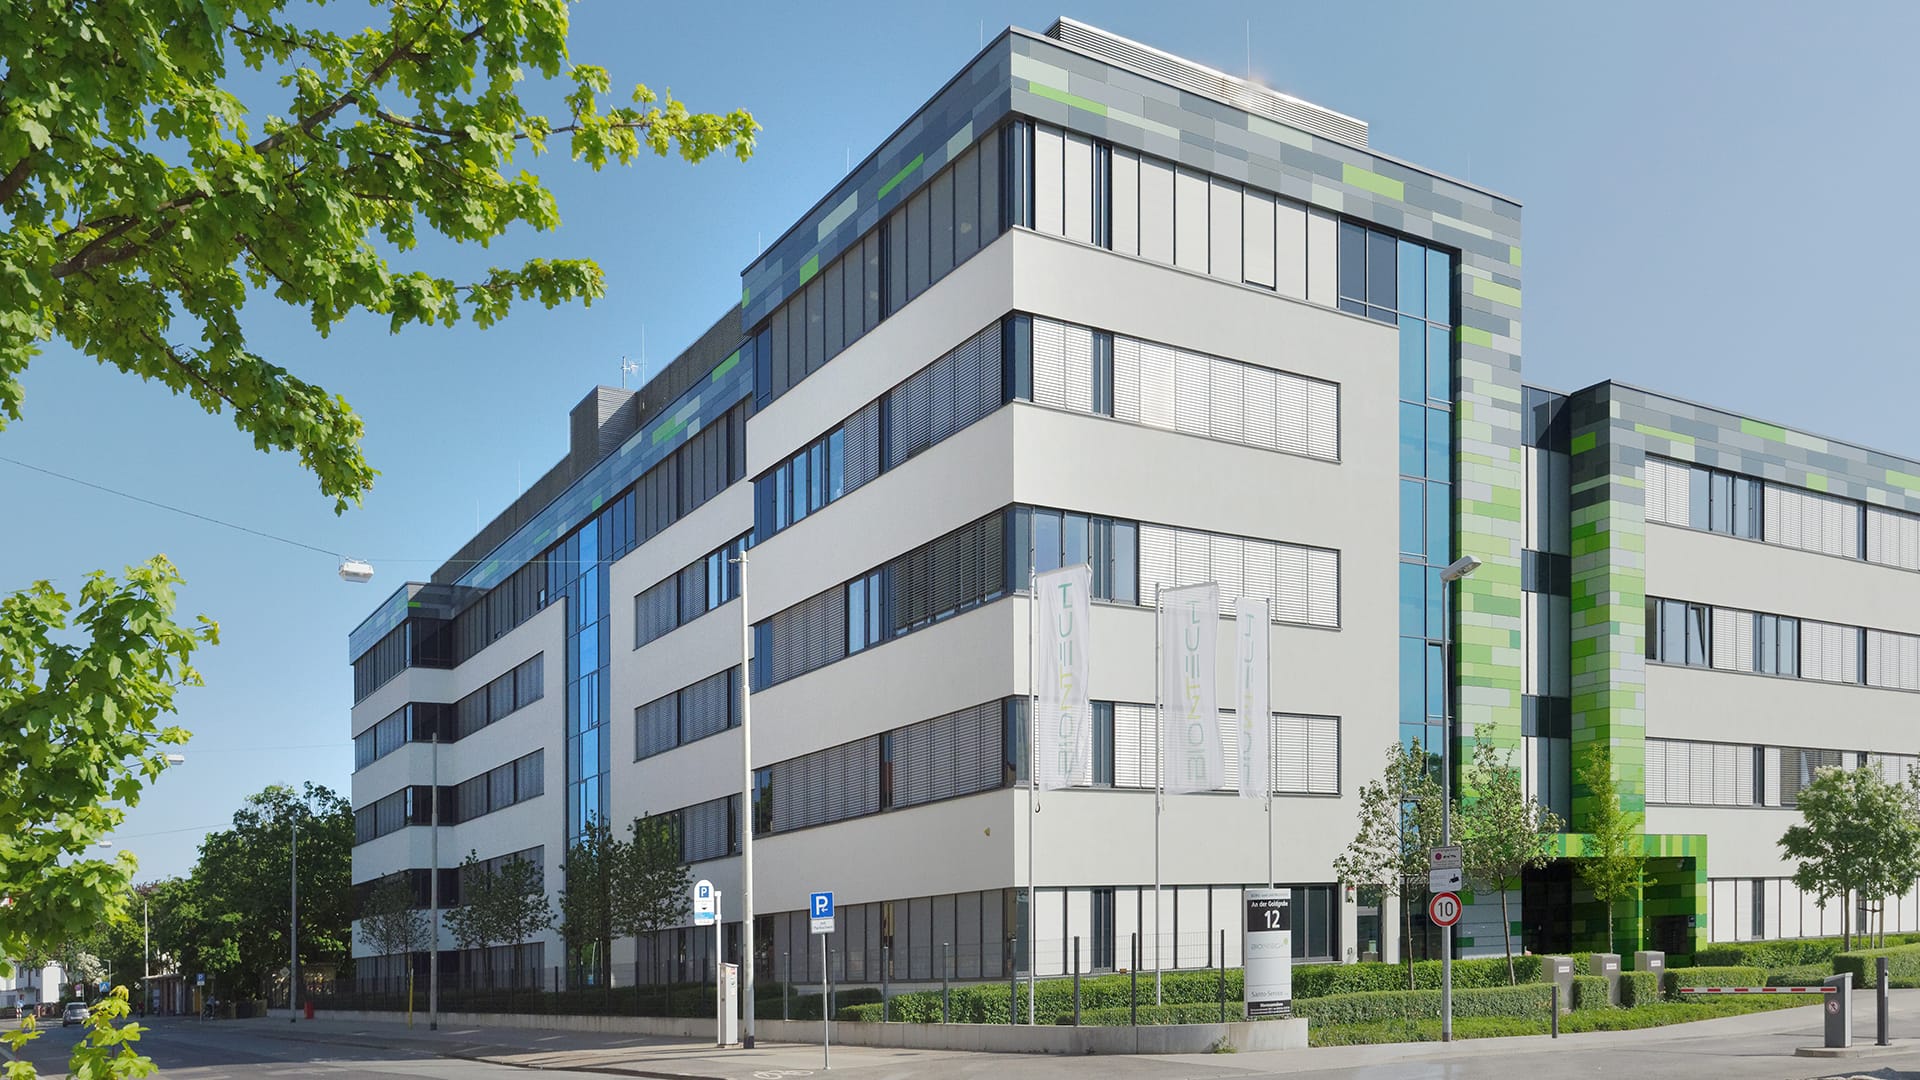 The BioNTech headquarters in Mainz, Germany